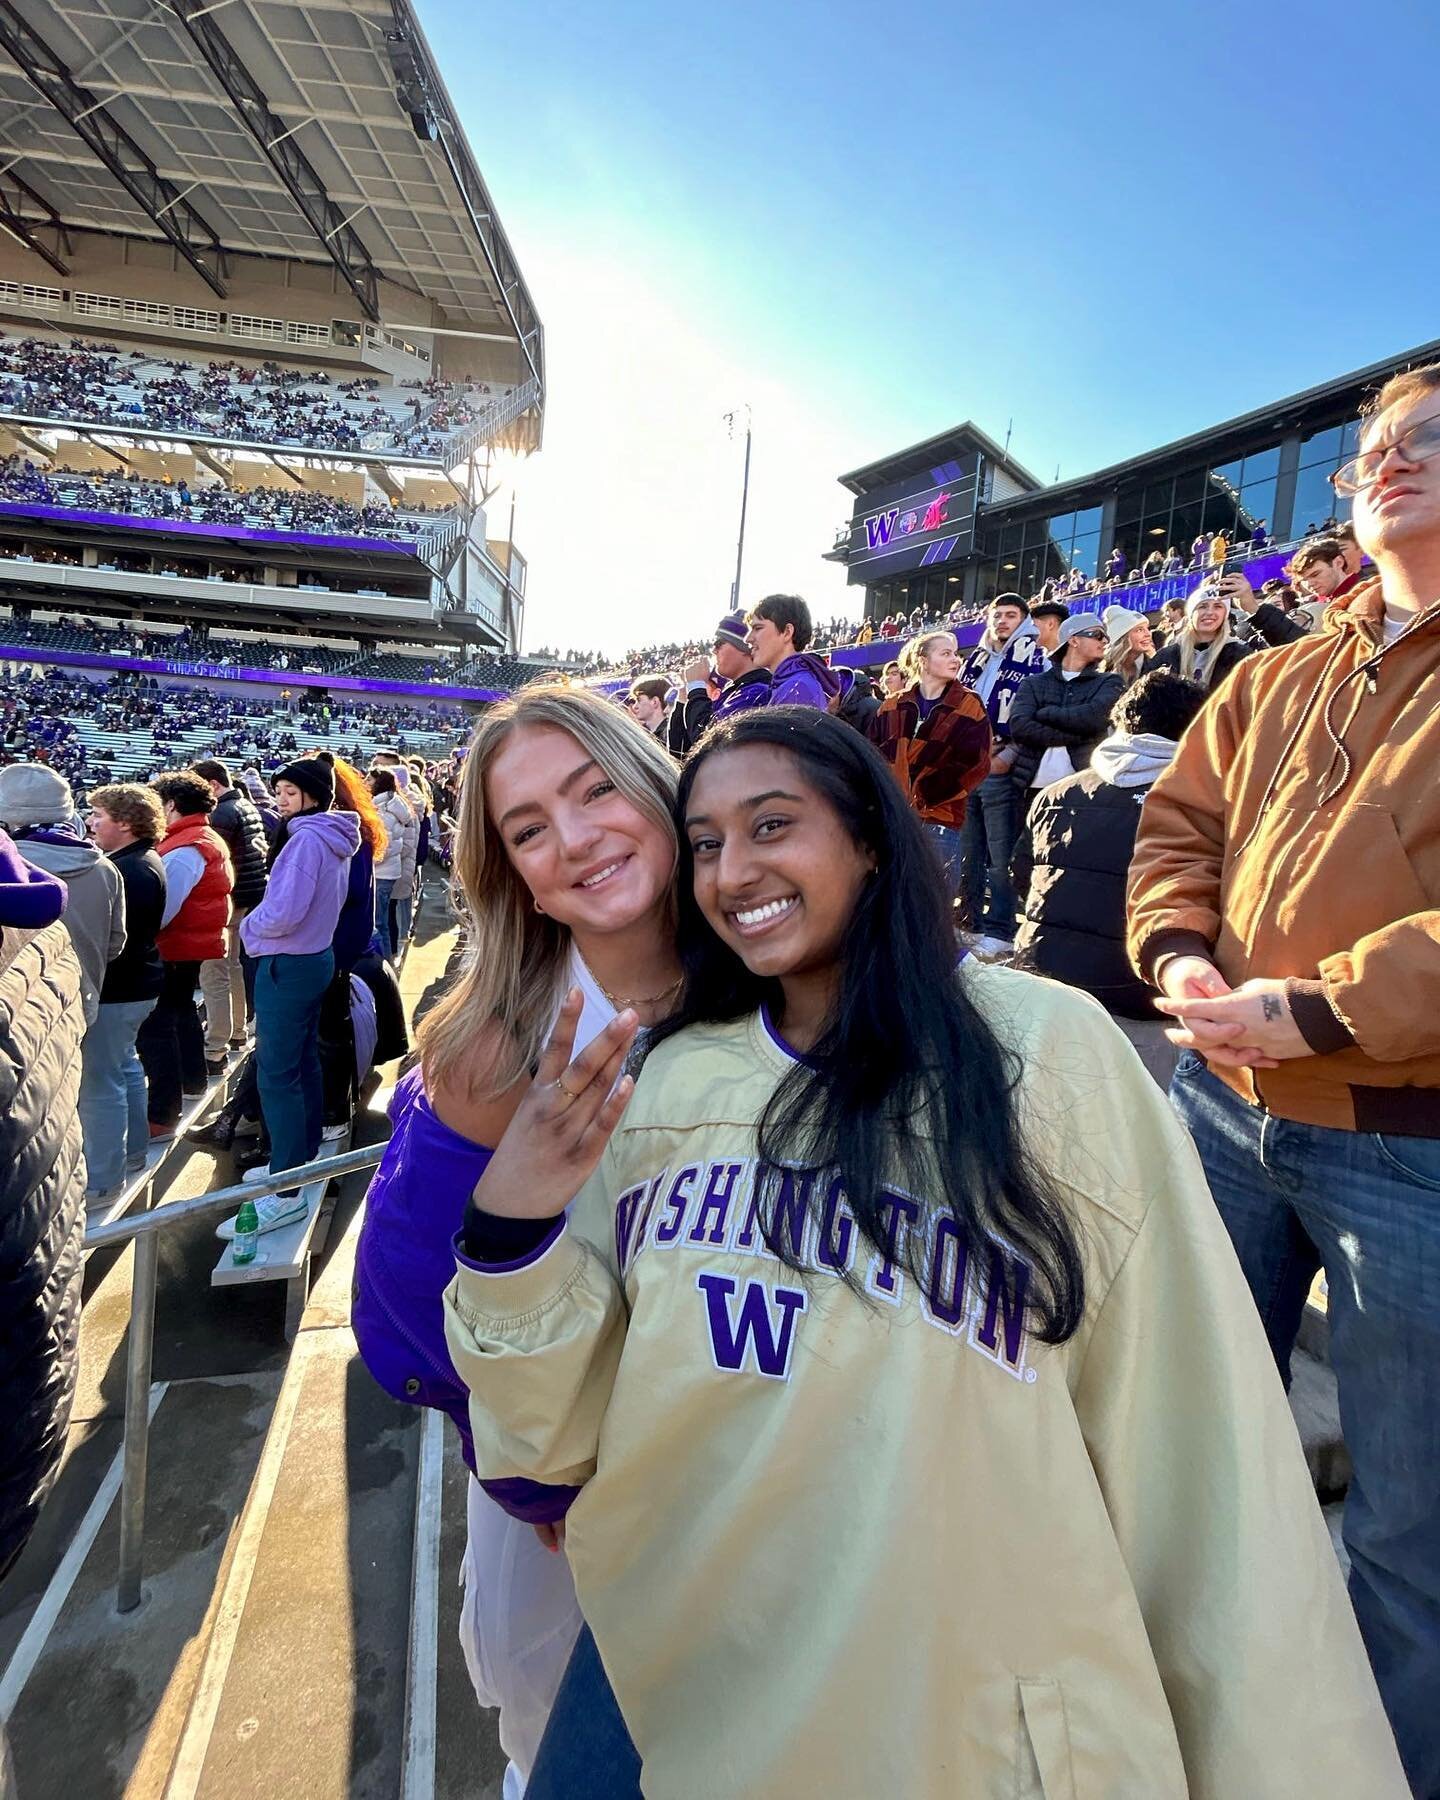 Cheering on our dawgs in Vegas today for the PAC-12 championship! ☔️

#uwchio